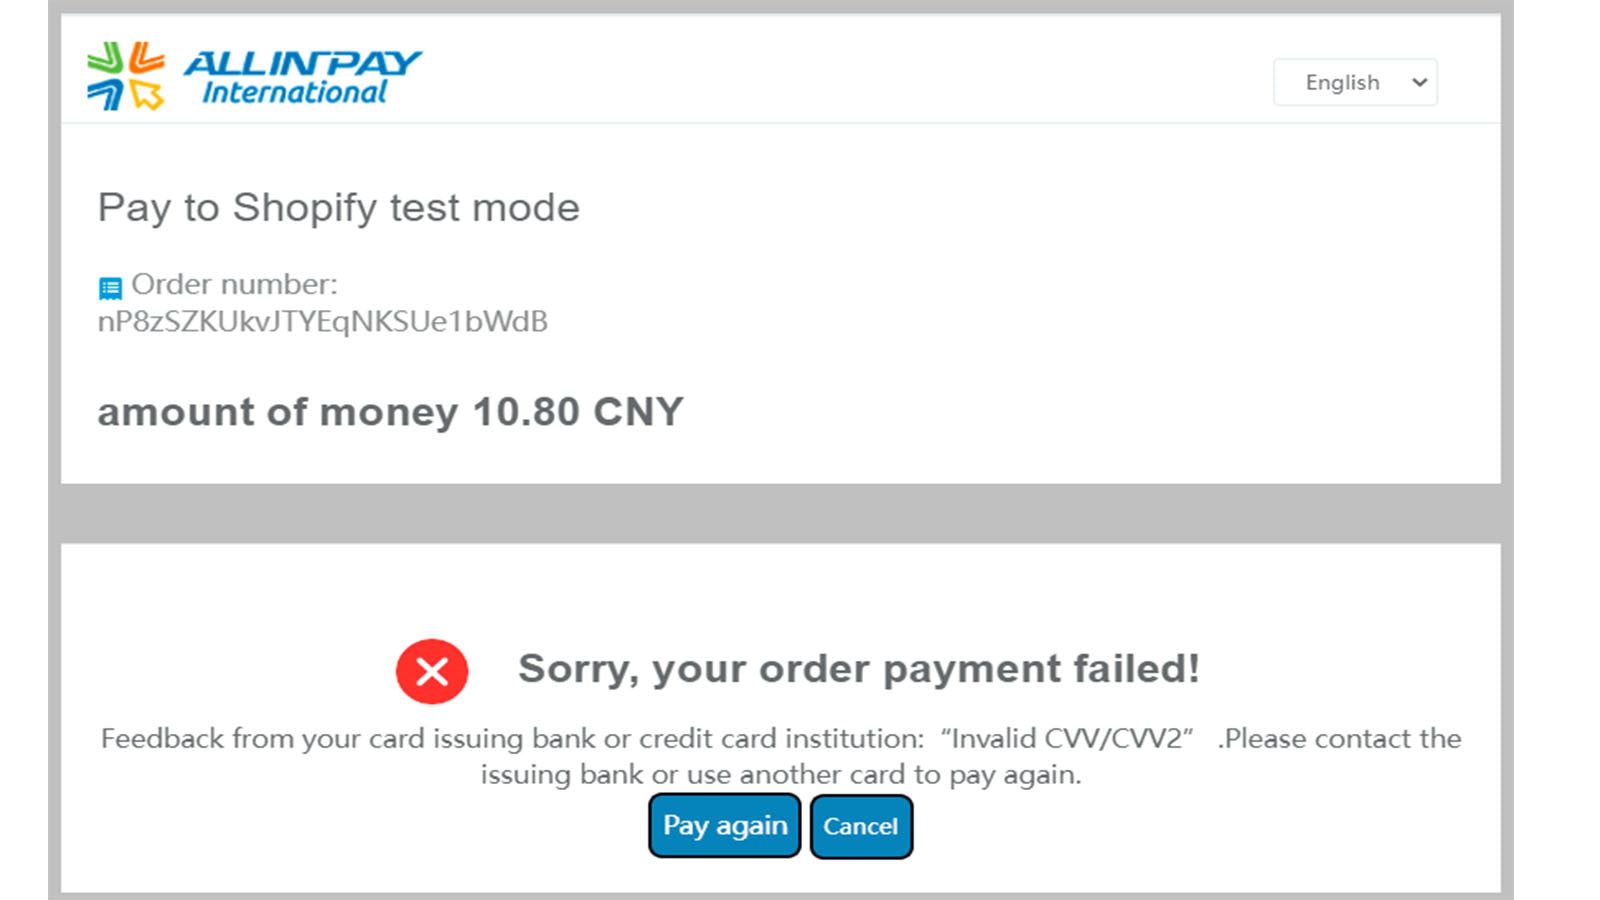 Payment failure or abnormal payment